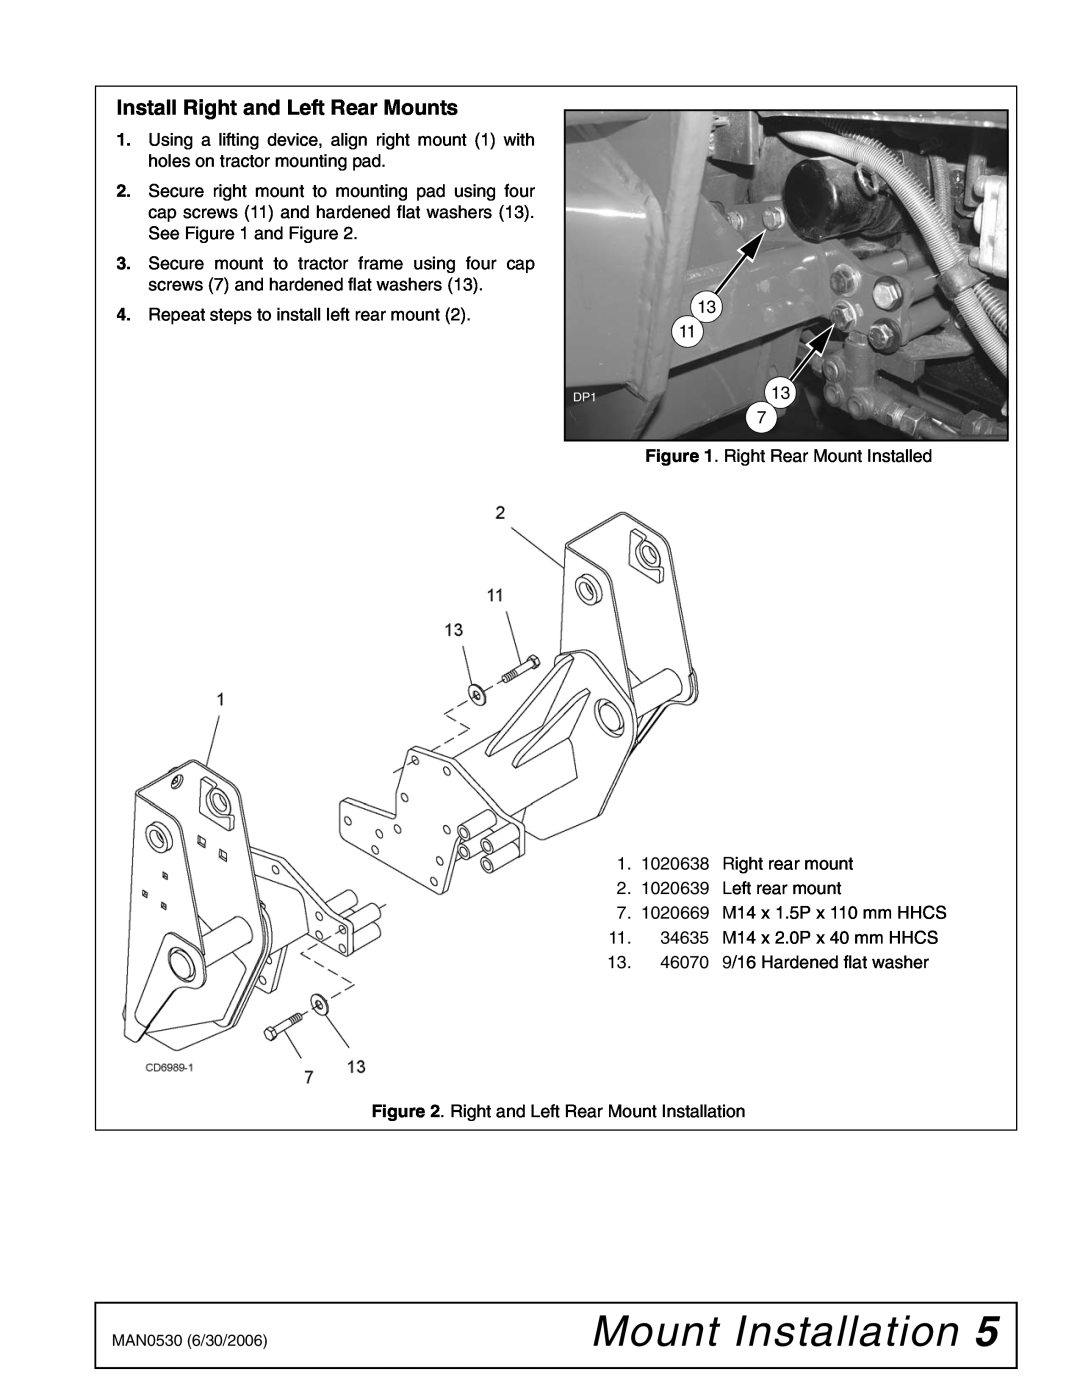 Woods Equipment 211718 installation manual Mount Installation, Install Right and Left Rear Mounts 